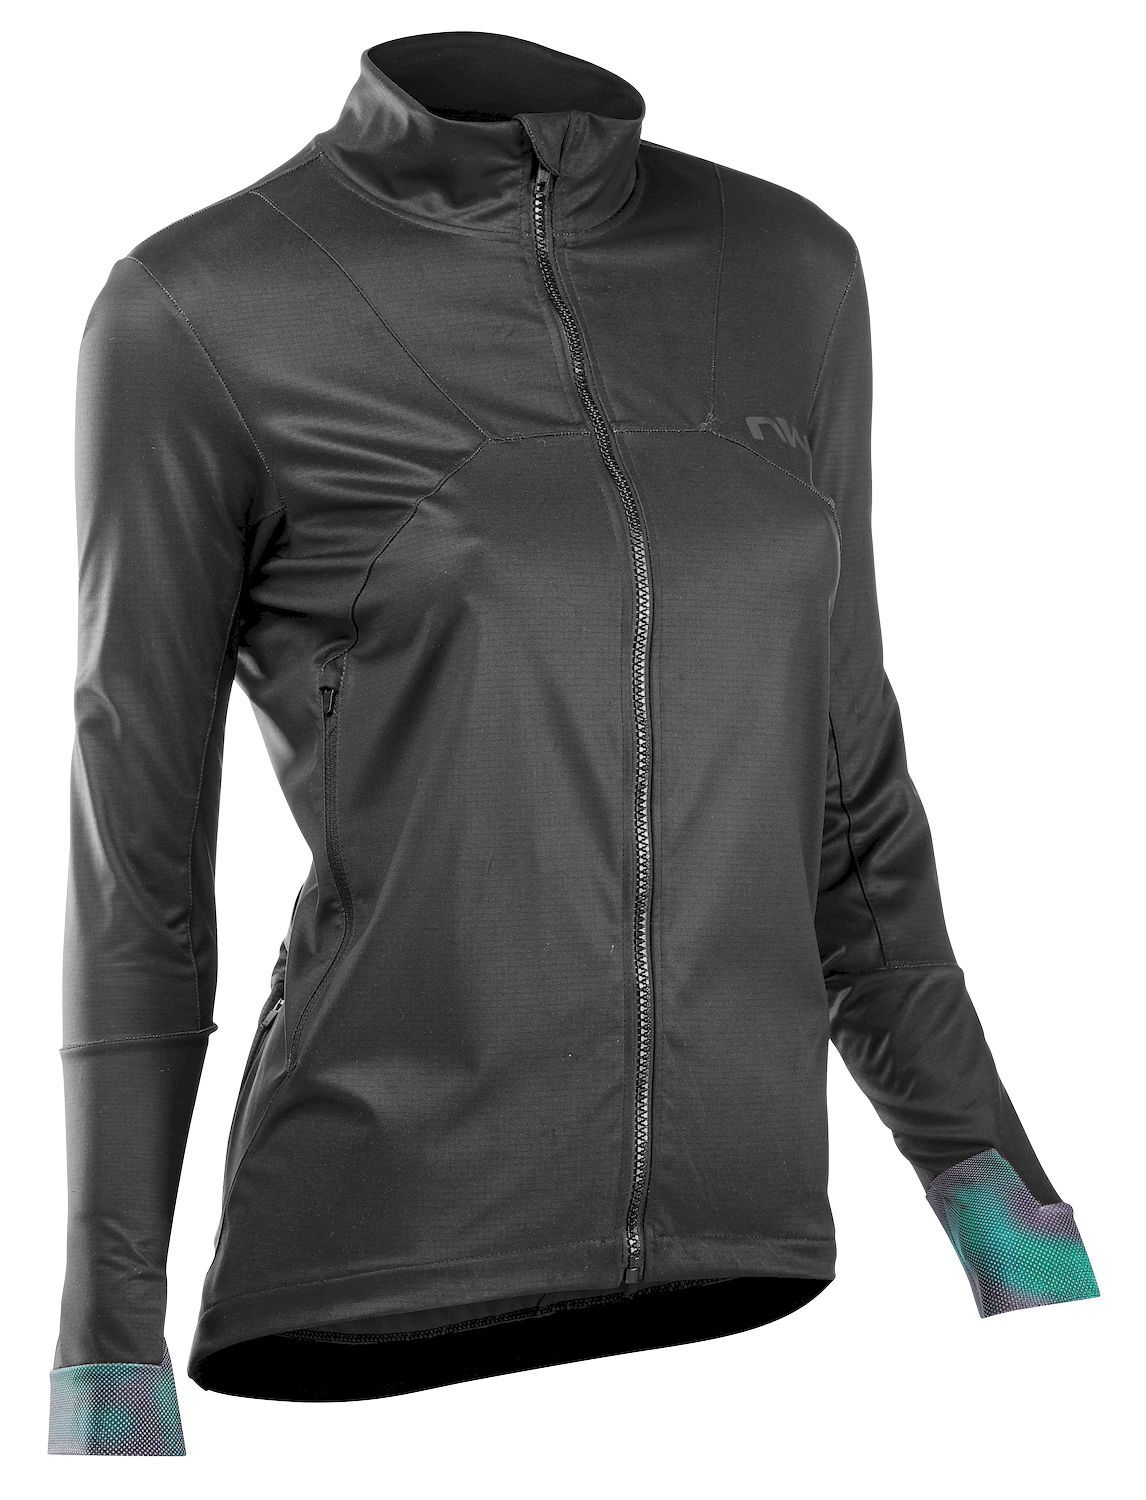 Northwave Extreme 2 Wmn Jacket - Chaqueta ciclismo - Mujer